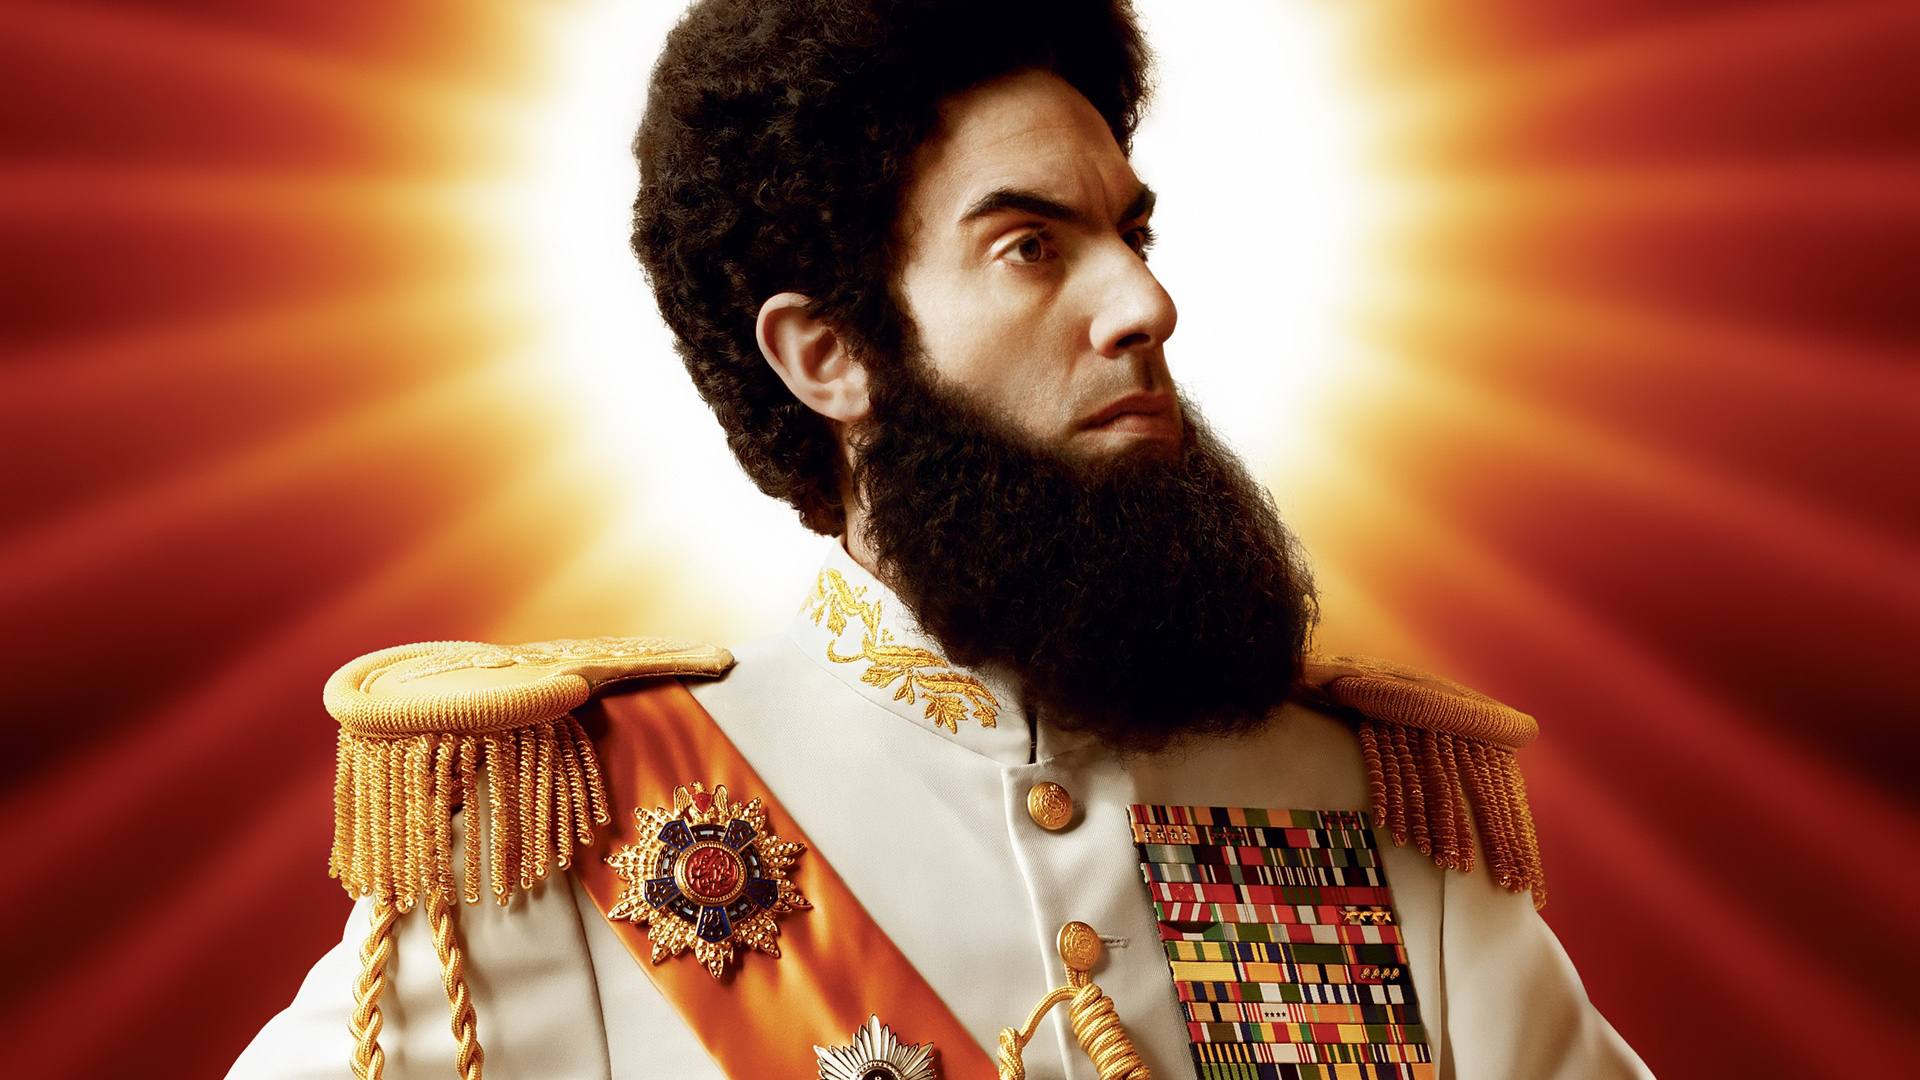 The Dictator Backgrounds, Compatible - PC, Mobile, Gadgets| 1920x1080 px